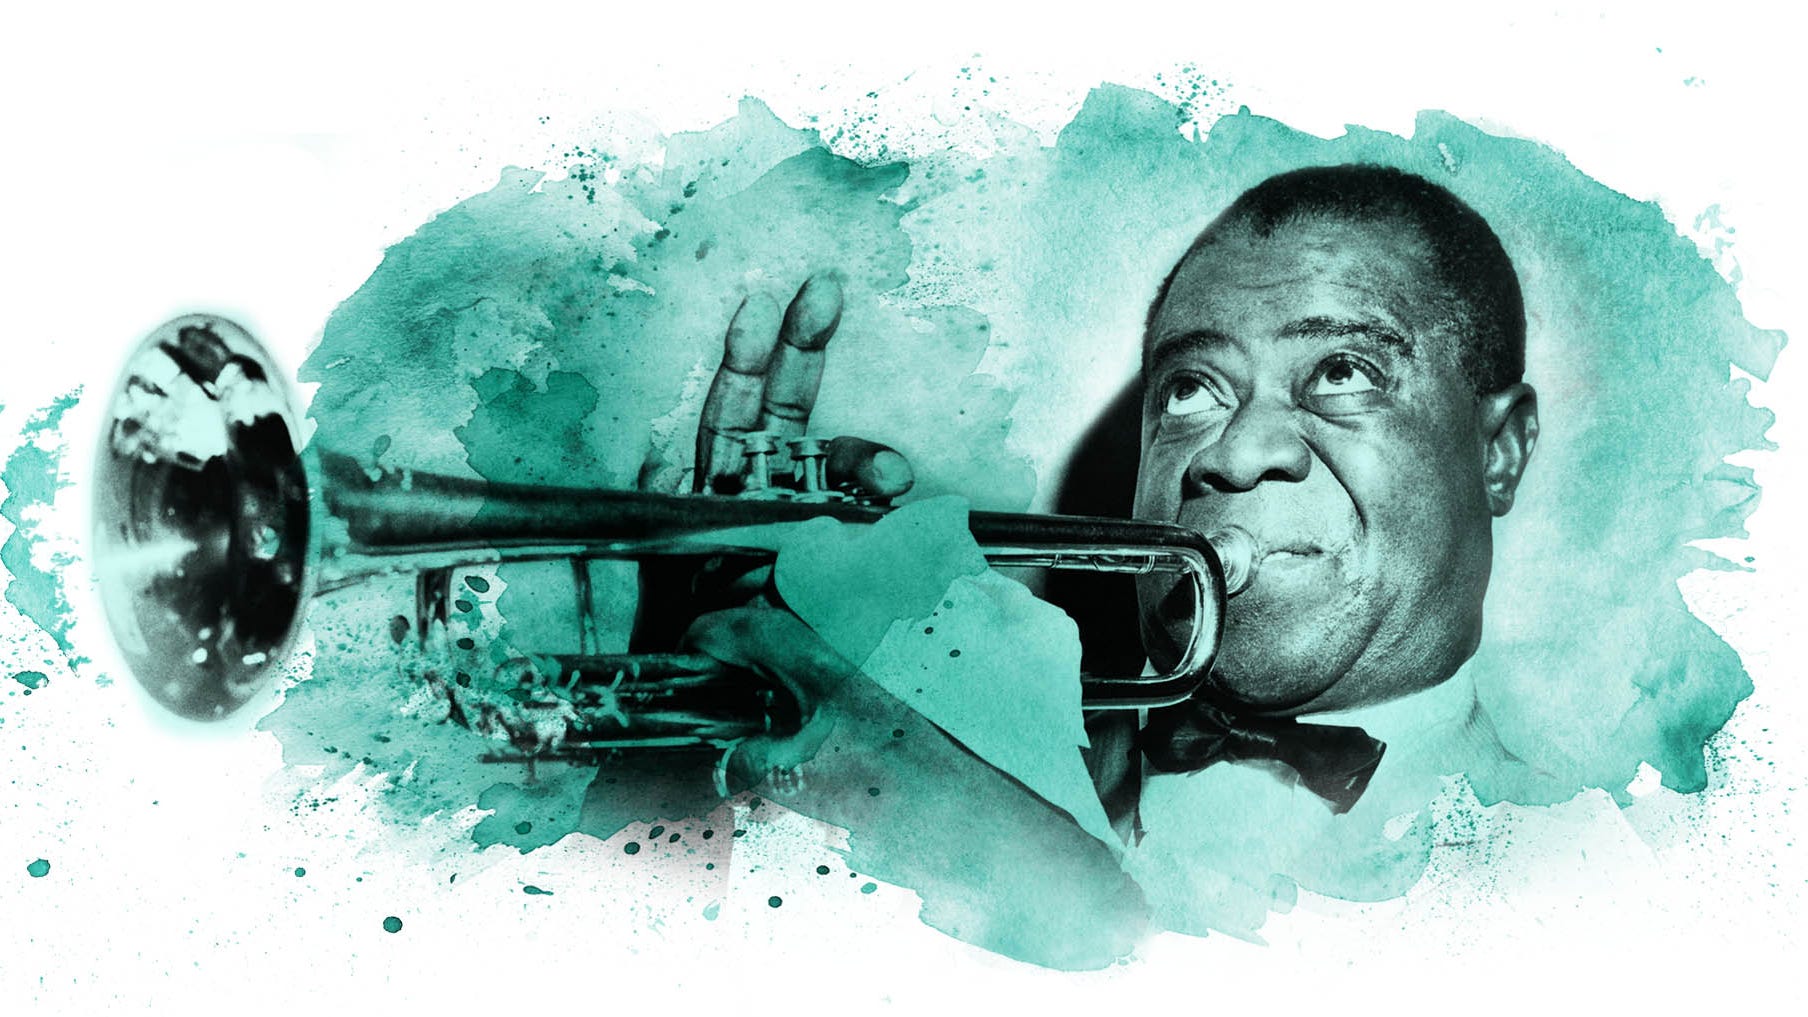 Louis Armstrong  New Orleans Trumpet Player & Singer